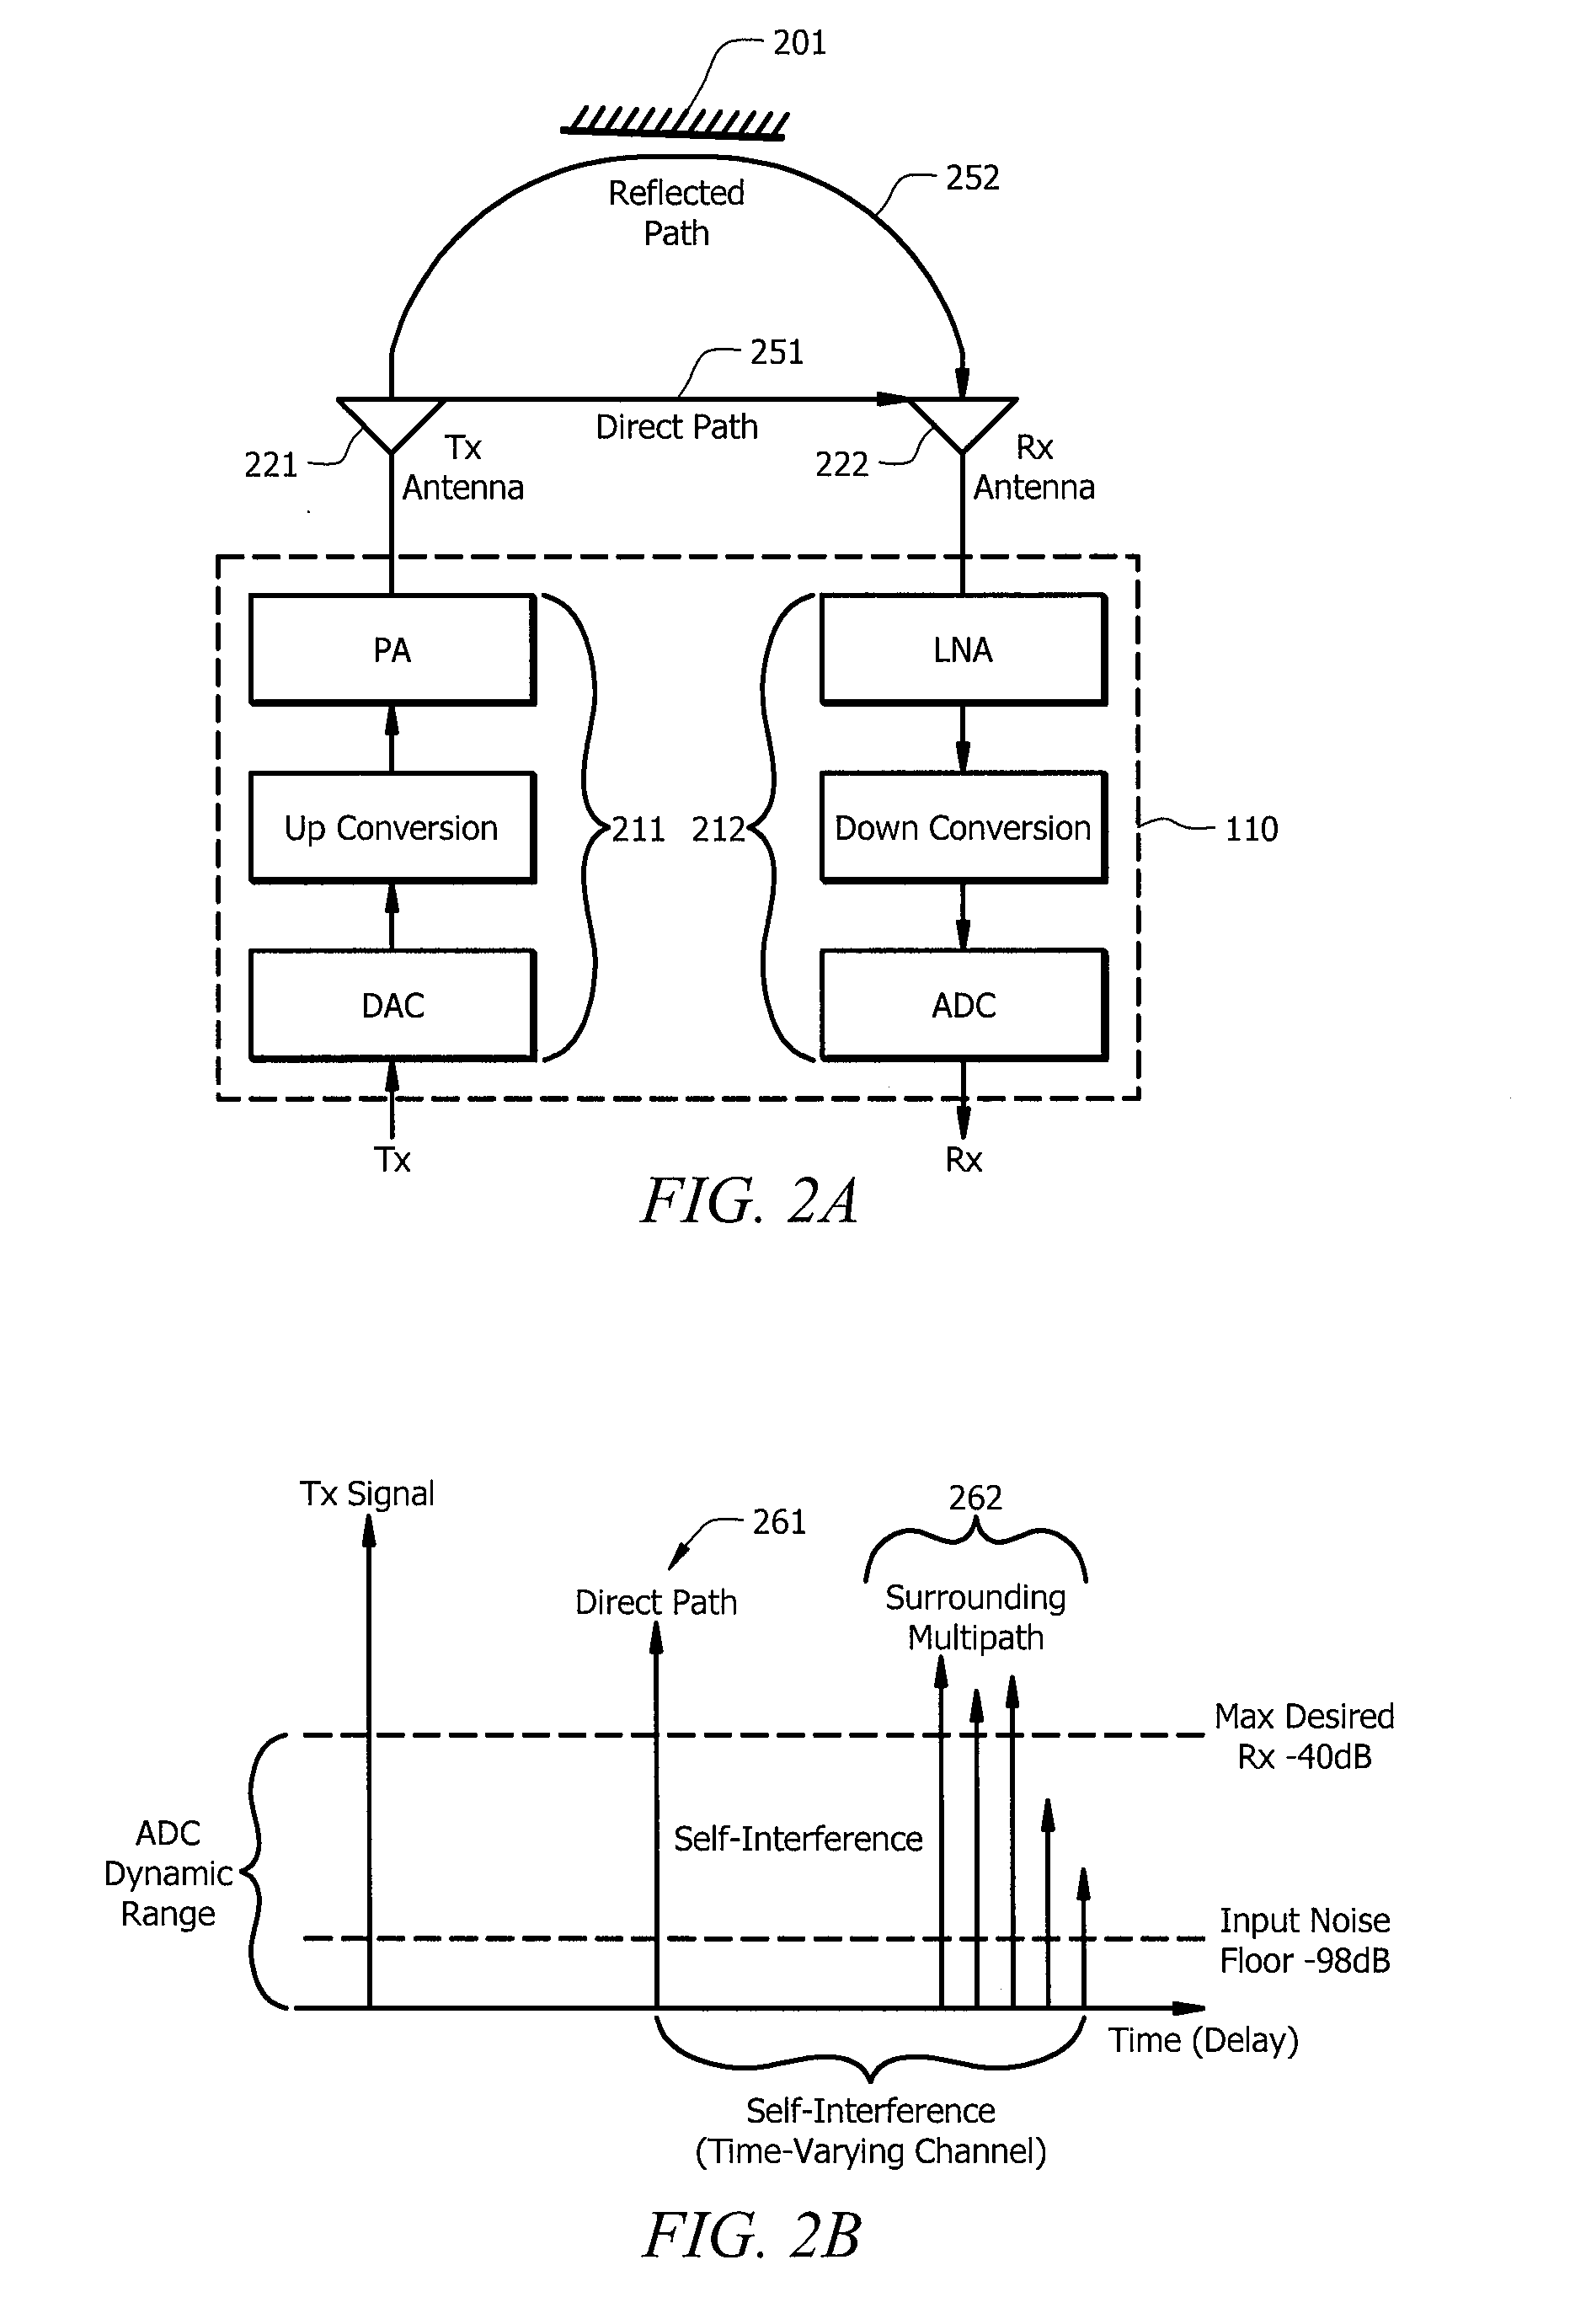 Systems and methods for mitigation of self-interference in spectrally efficient full duplex comminucations